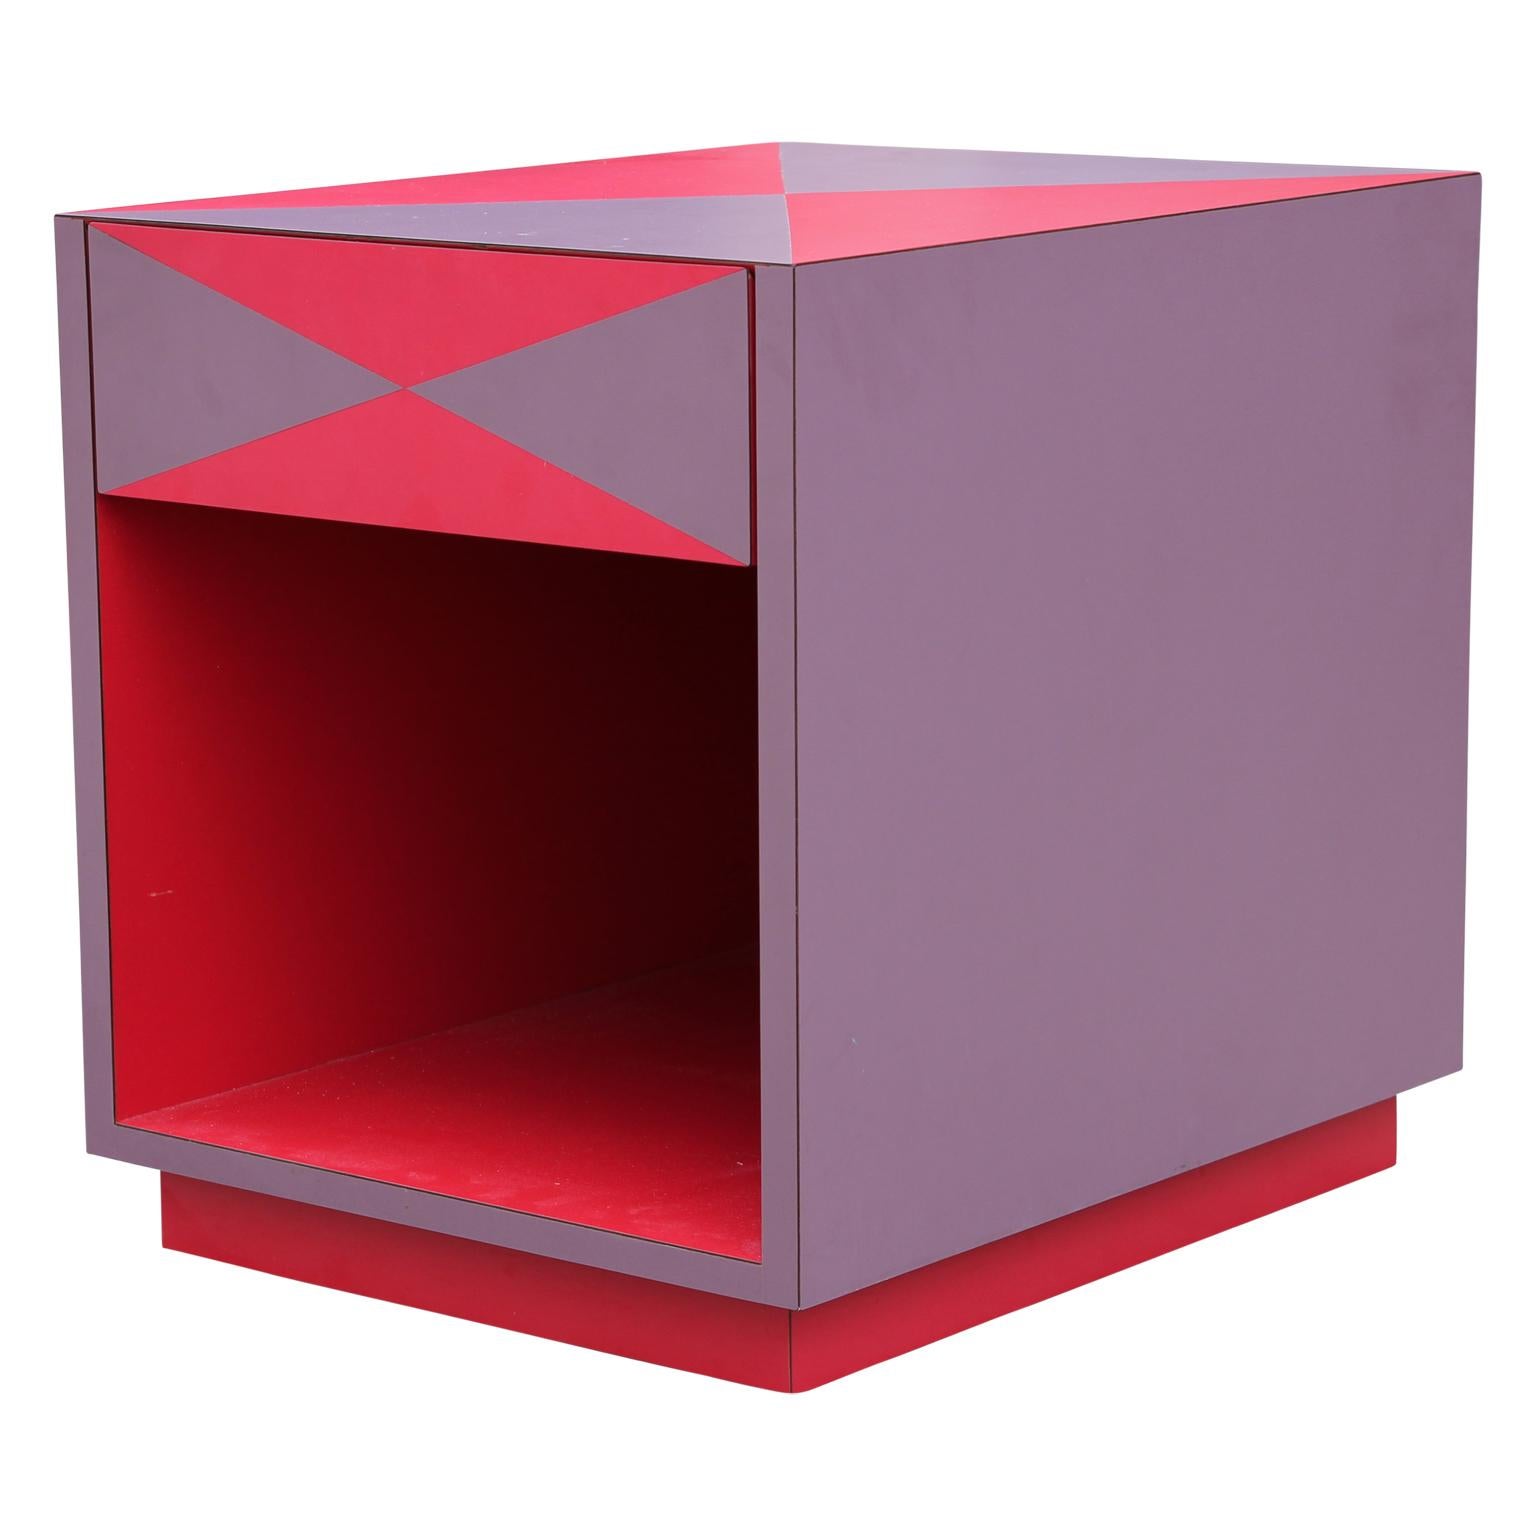 Purple and red Memphis style side table with open storage compartment and pull out drawer.